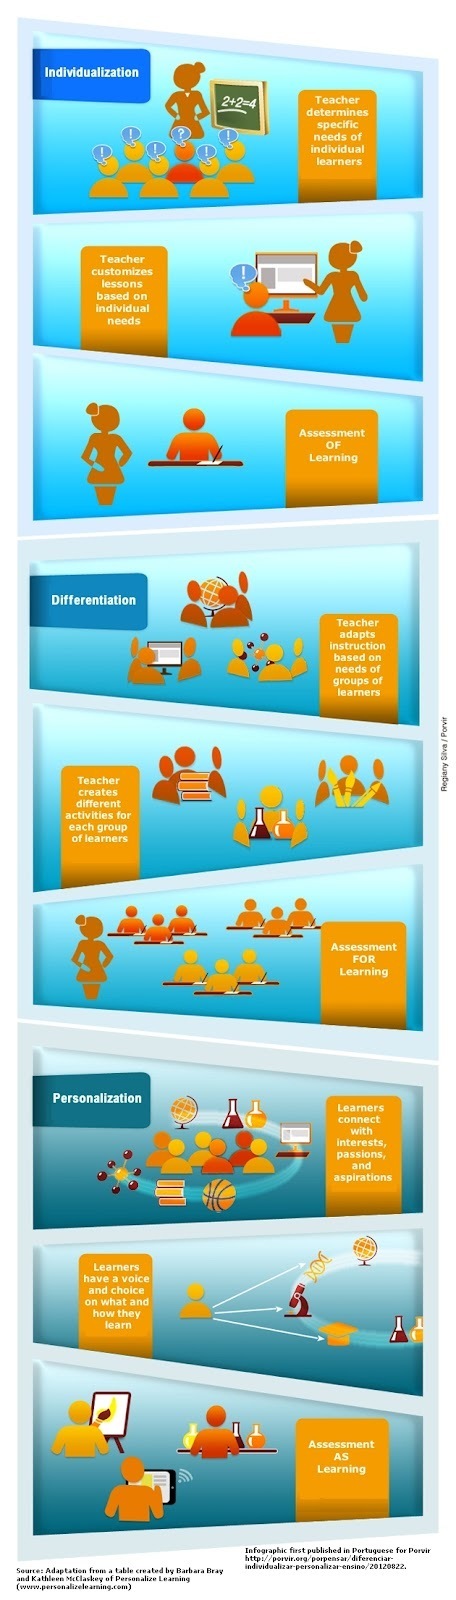 Infographic: Personalization vs Individualization vs Differentiation | 21st Century Learning and Teaching | Scoop.it